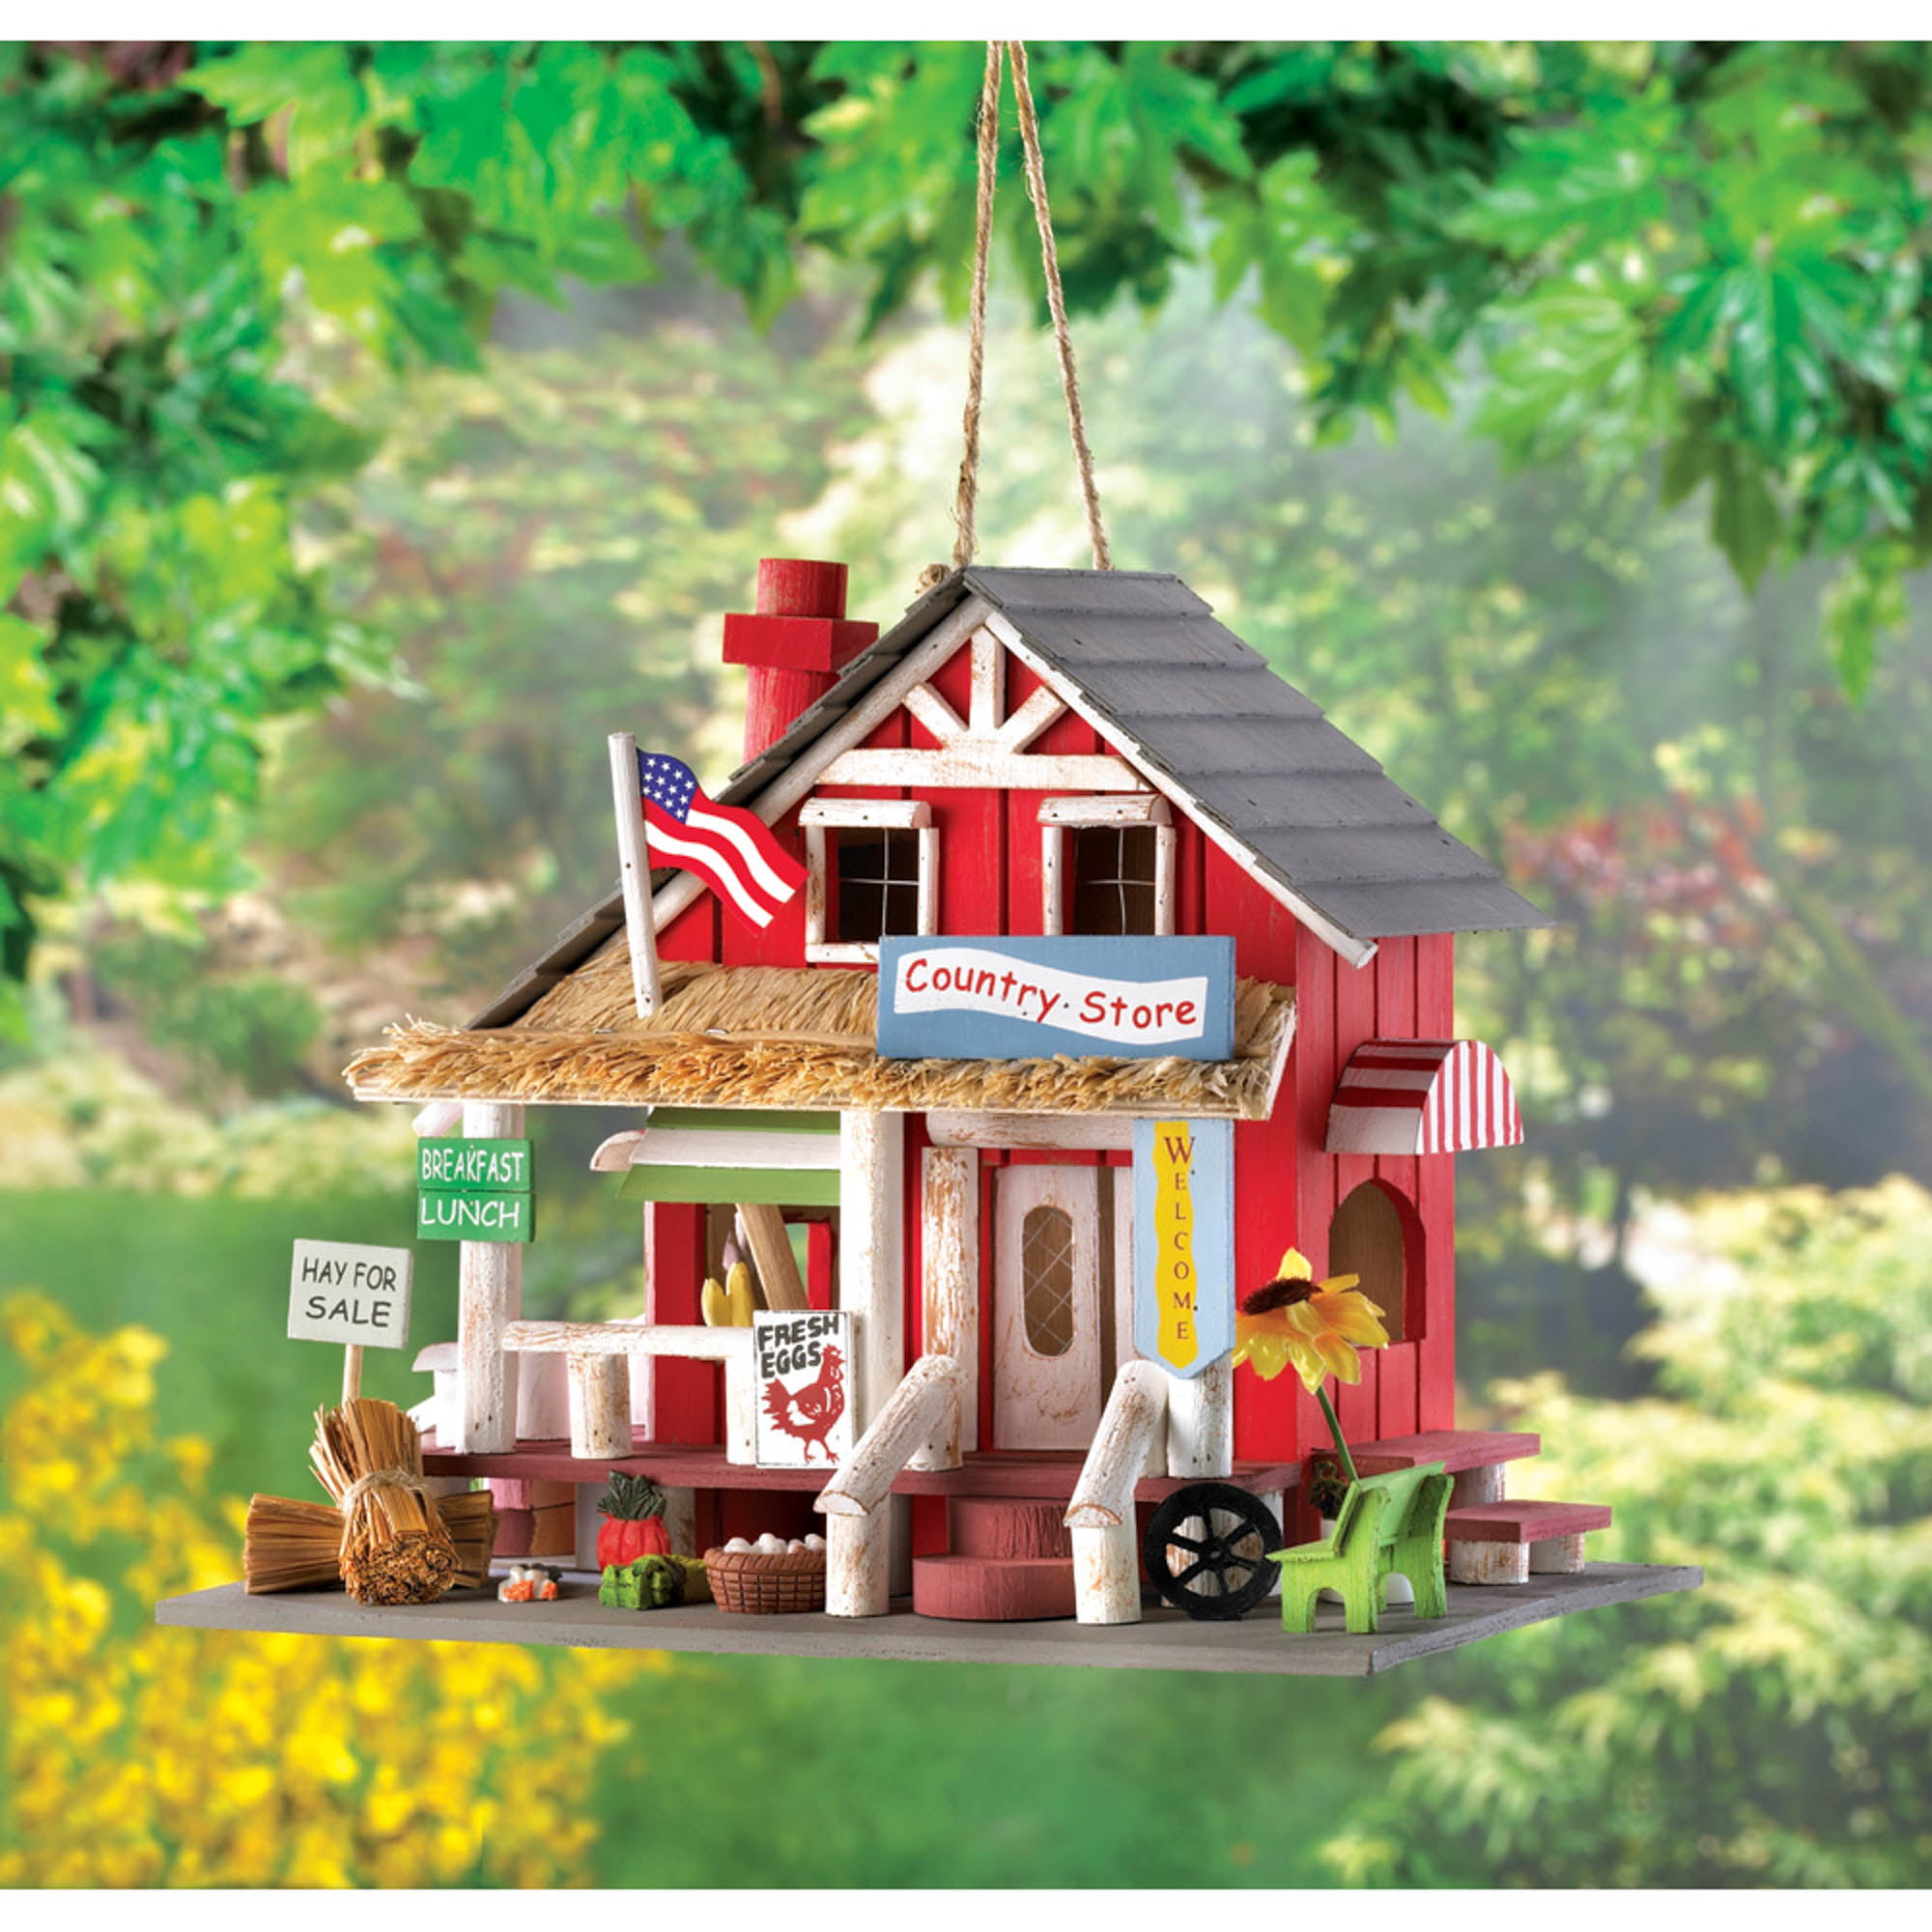 Zingz & Thingz Rustic Country Store Birdhouse 10.25x7x9